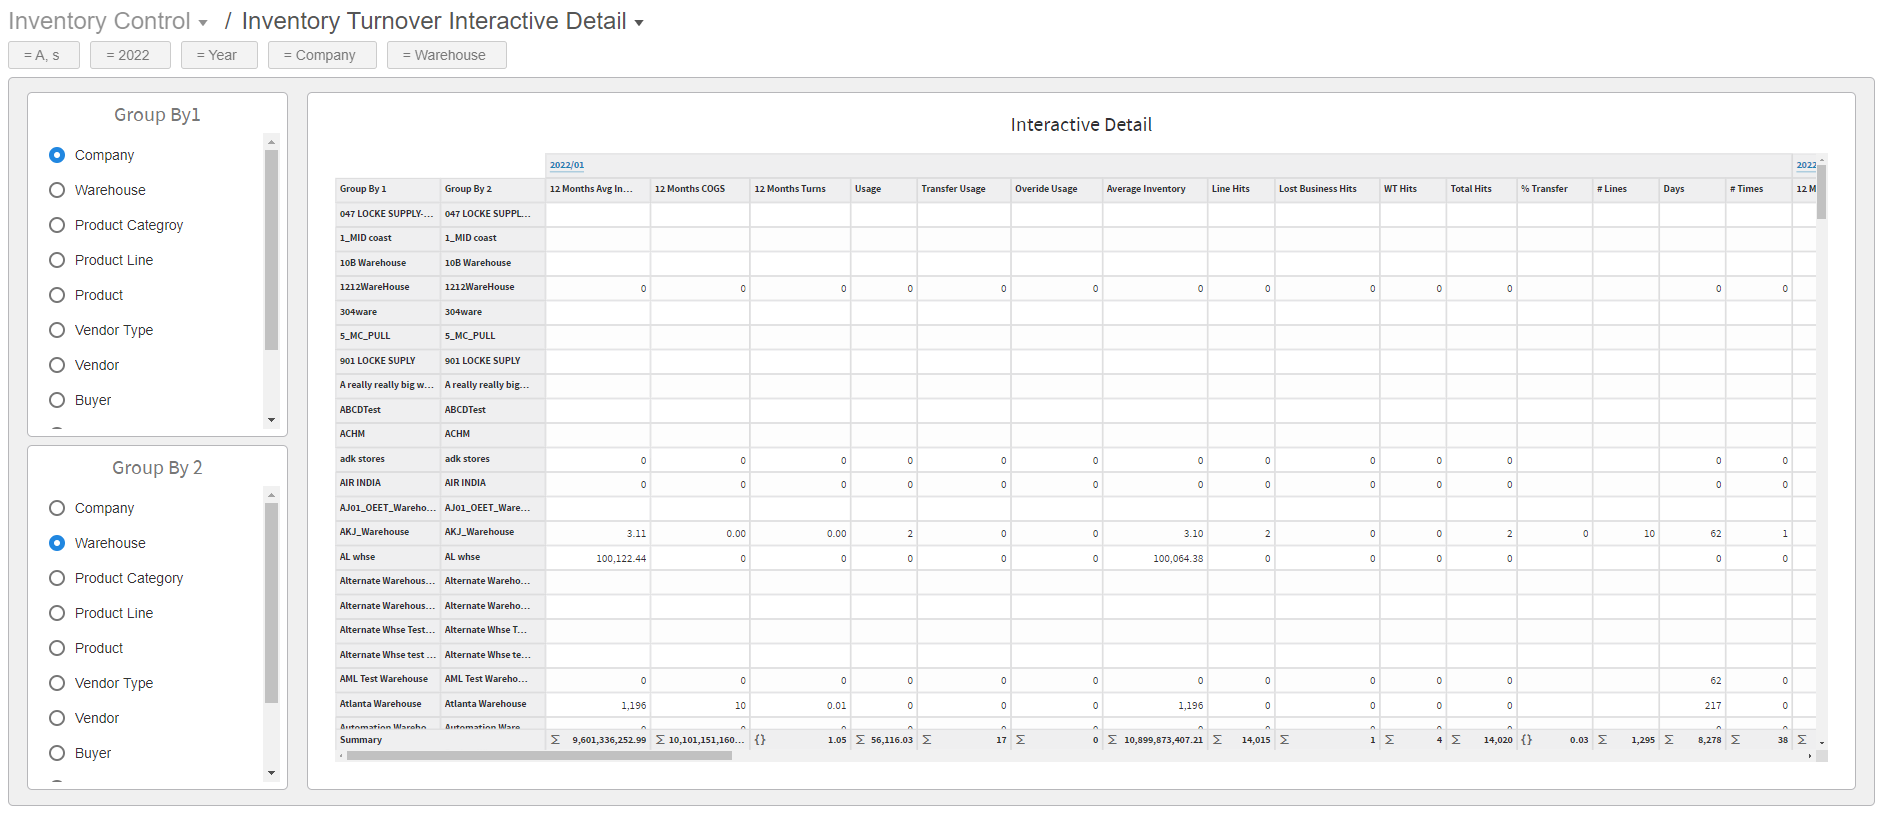 Inventory Turnover Interactive Detail dashboard